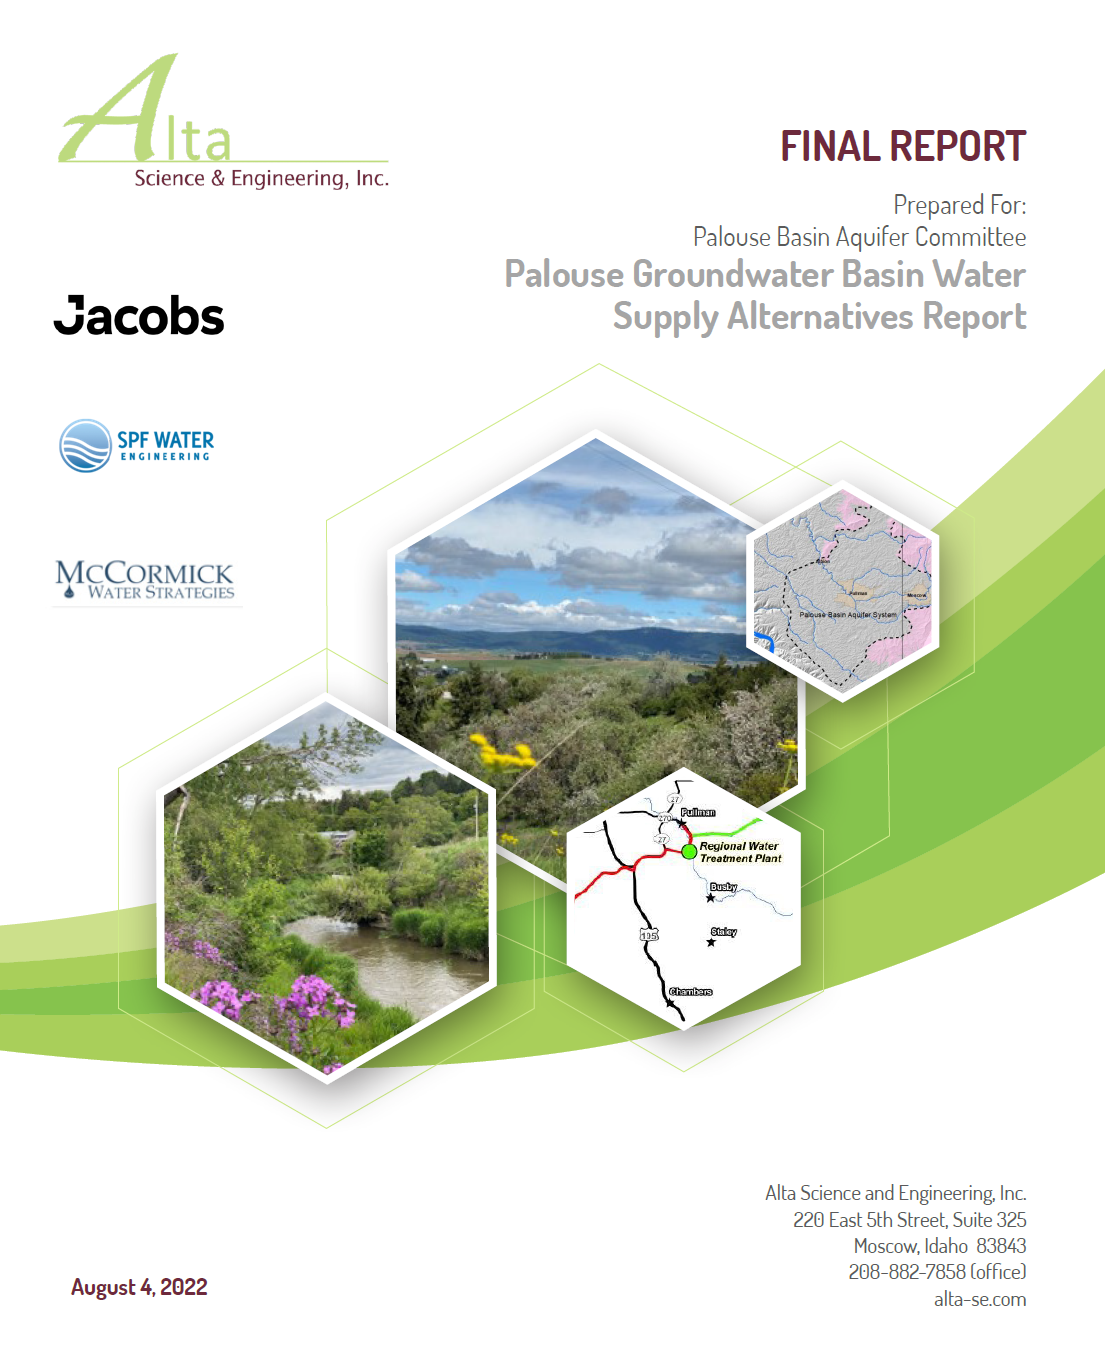 Cover Page of the Water Supply Alternatives Report written by Alta Science & Engineering